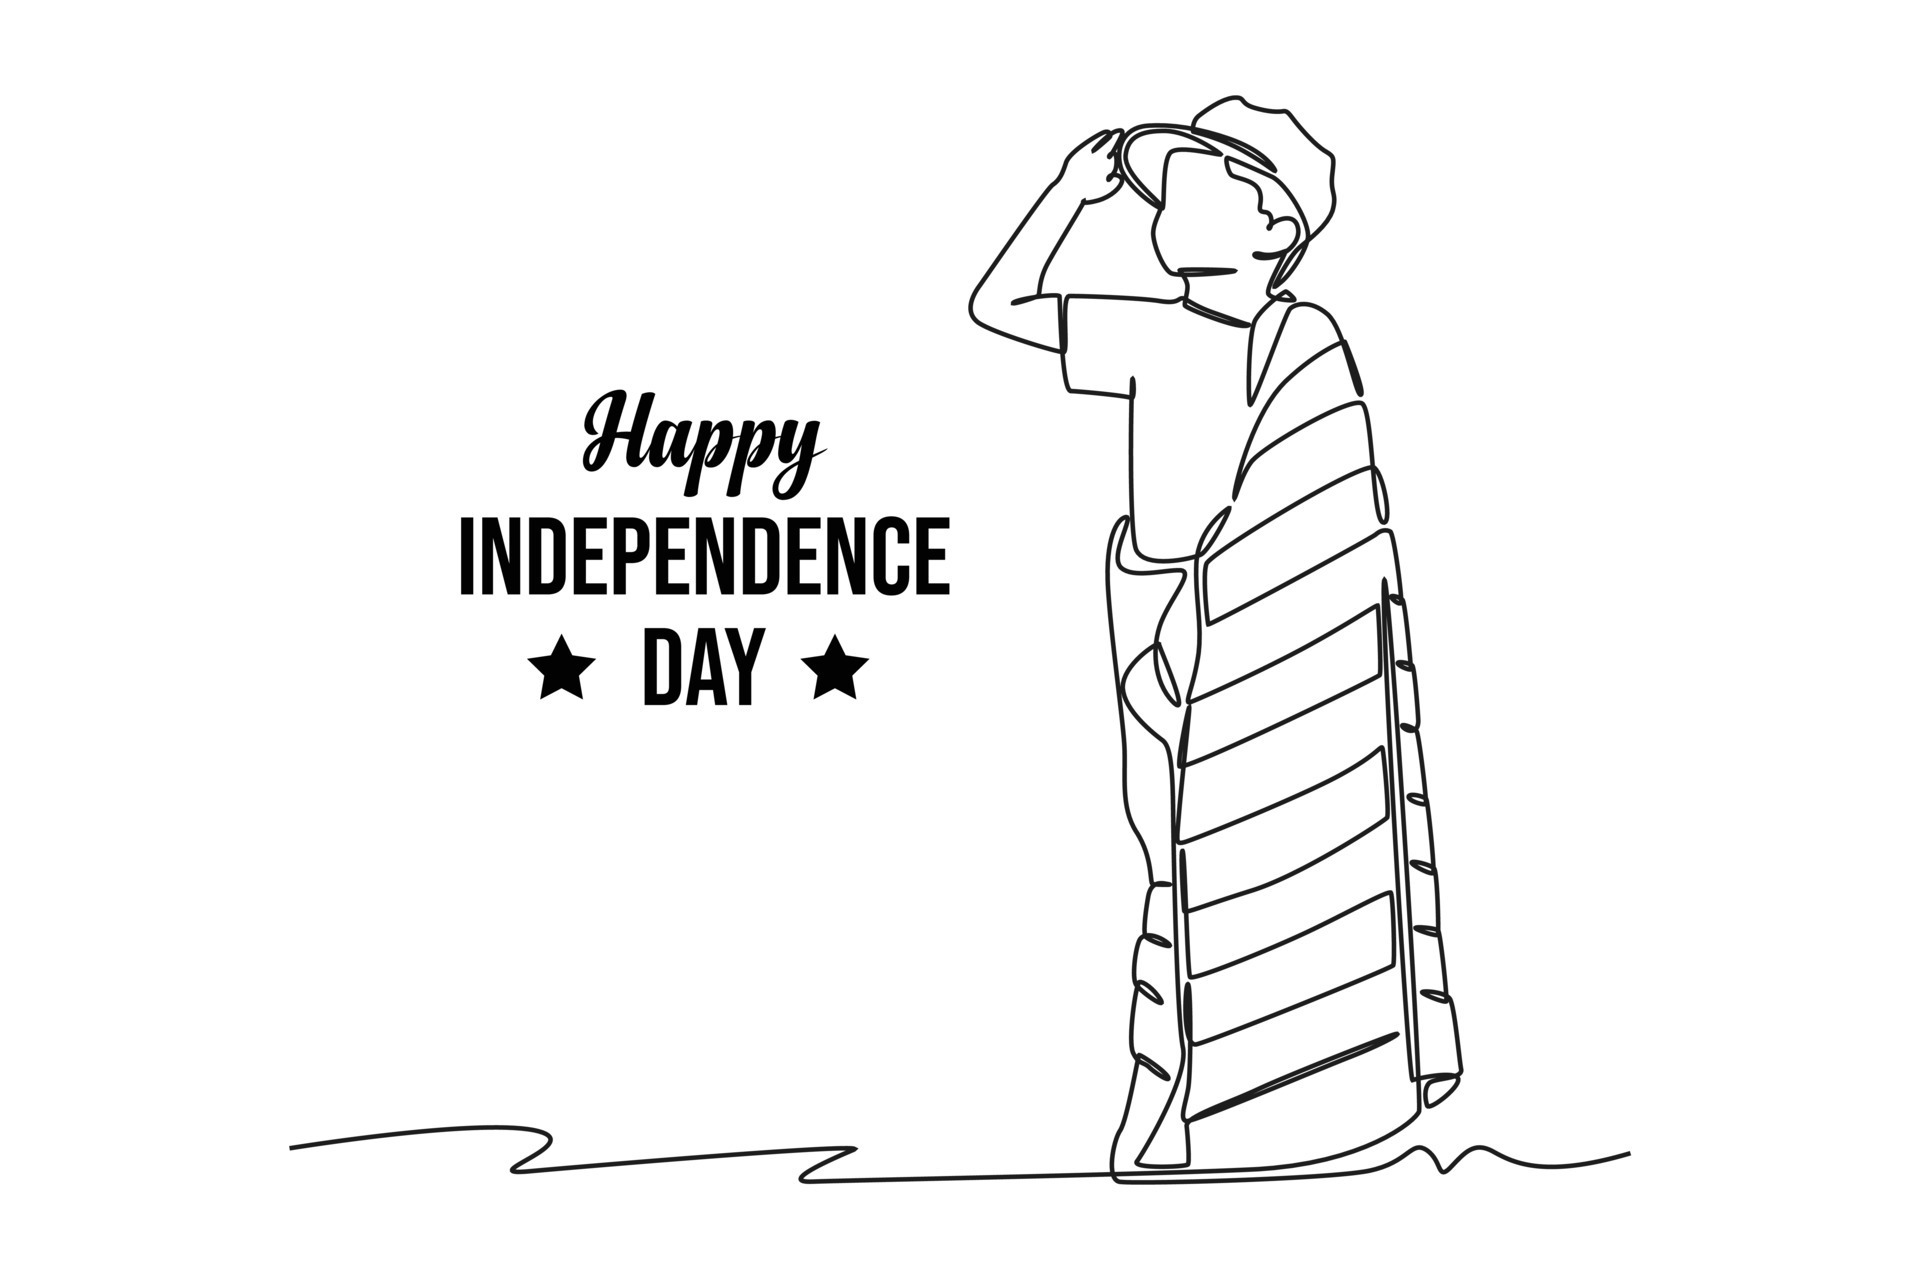 Happy independence day celebration hand draw Vector Image-saigonsouth.com.vn